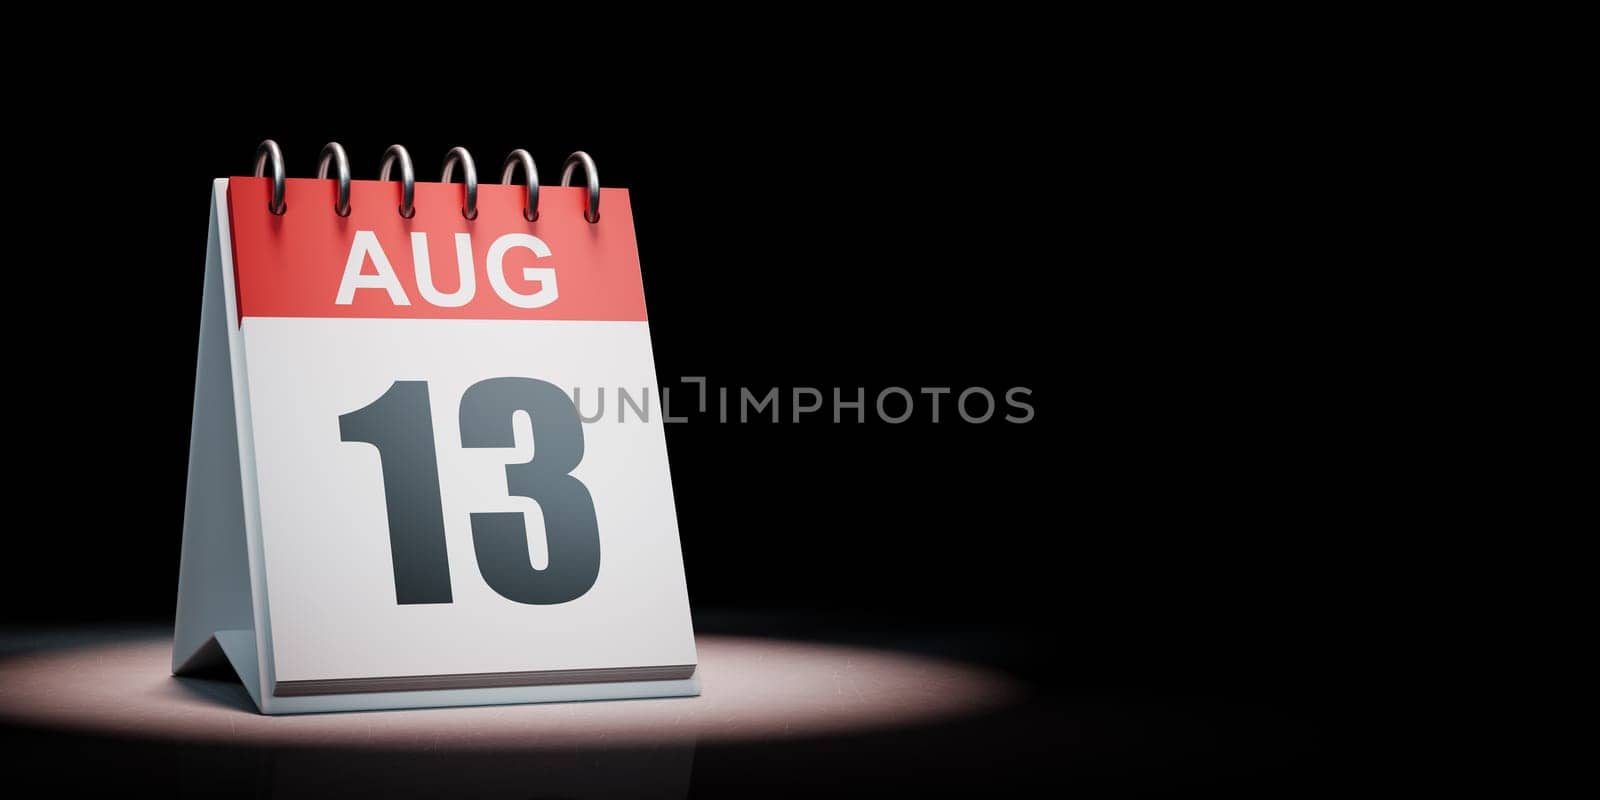 Red and White August 13 Desk Calendar Spotlighted on Black Background with Copy Space 3D Illustration